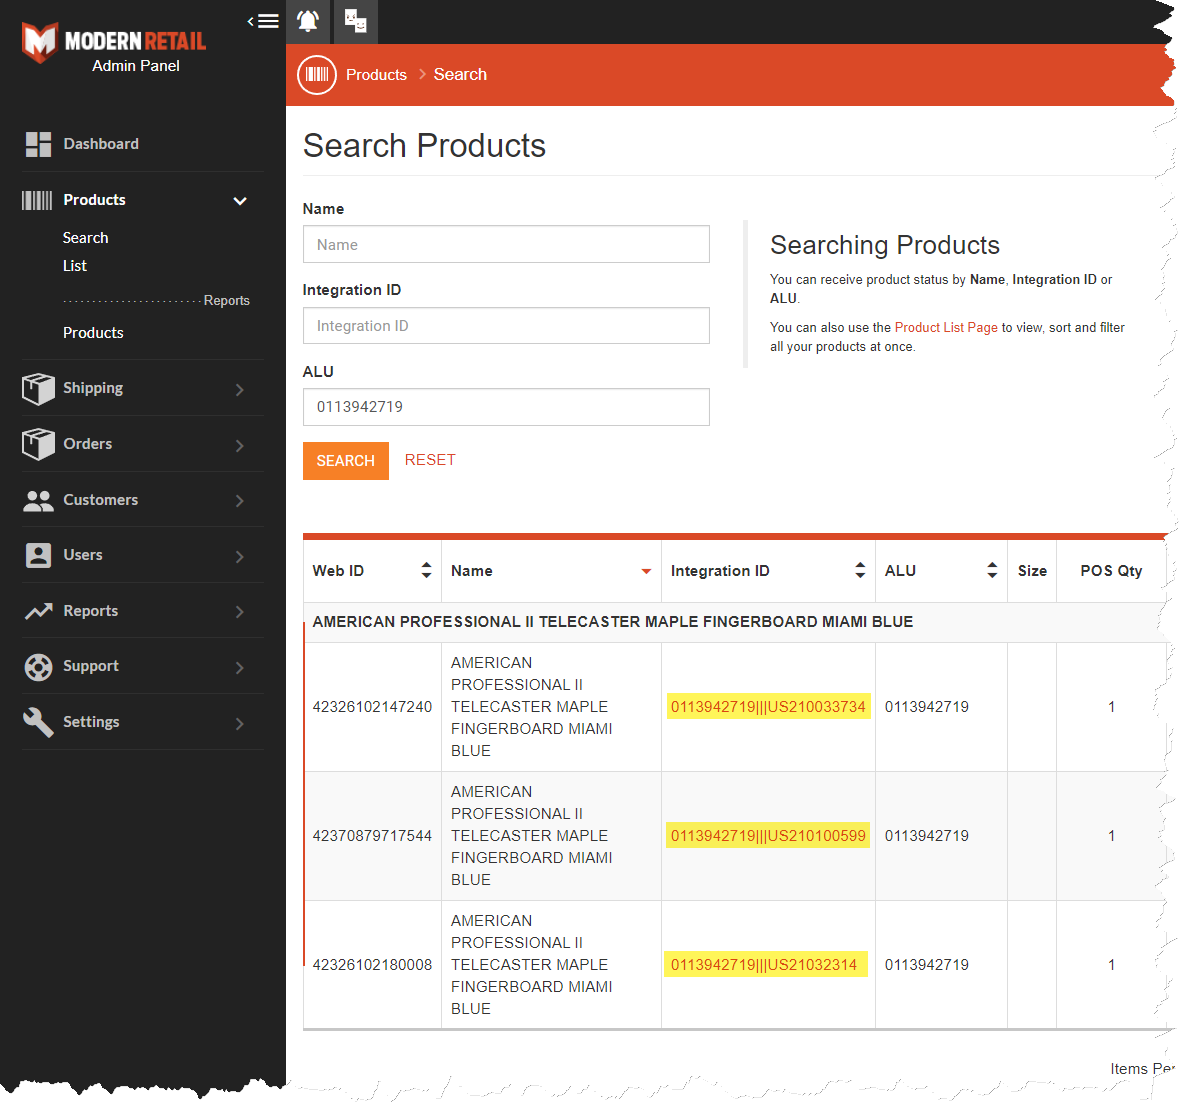 admin-panel-serialized-products.png